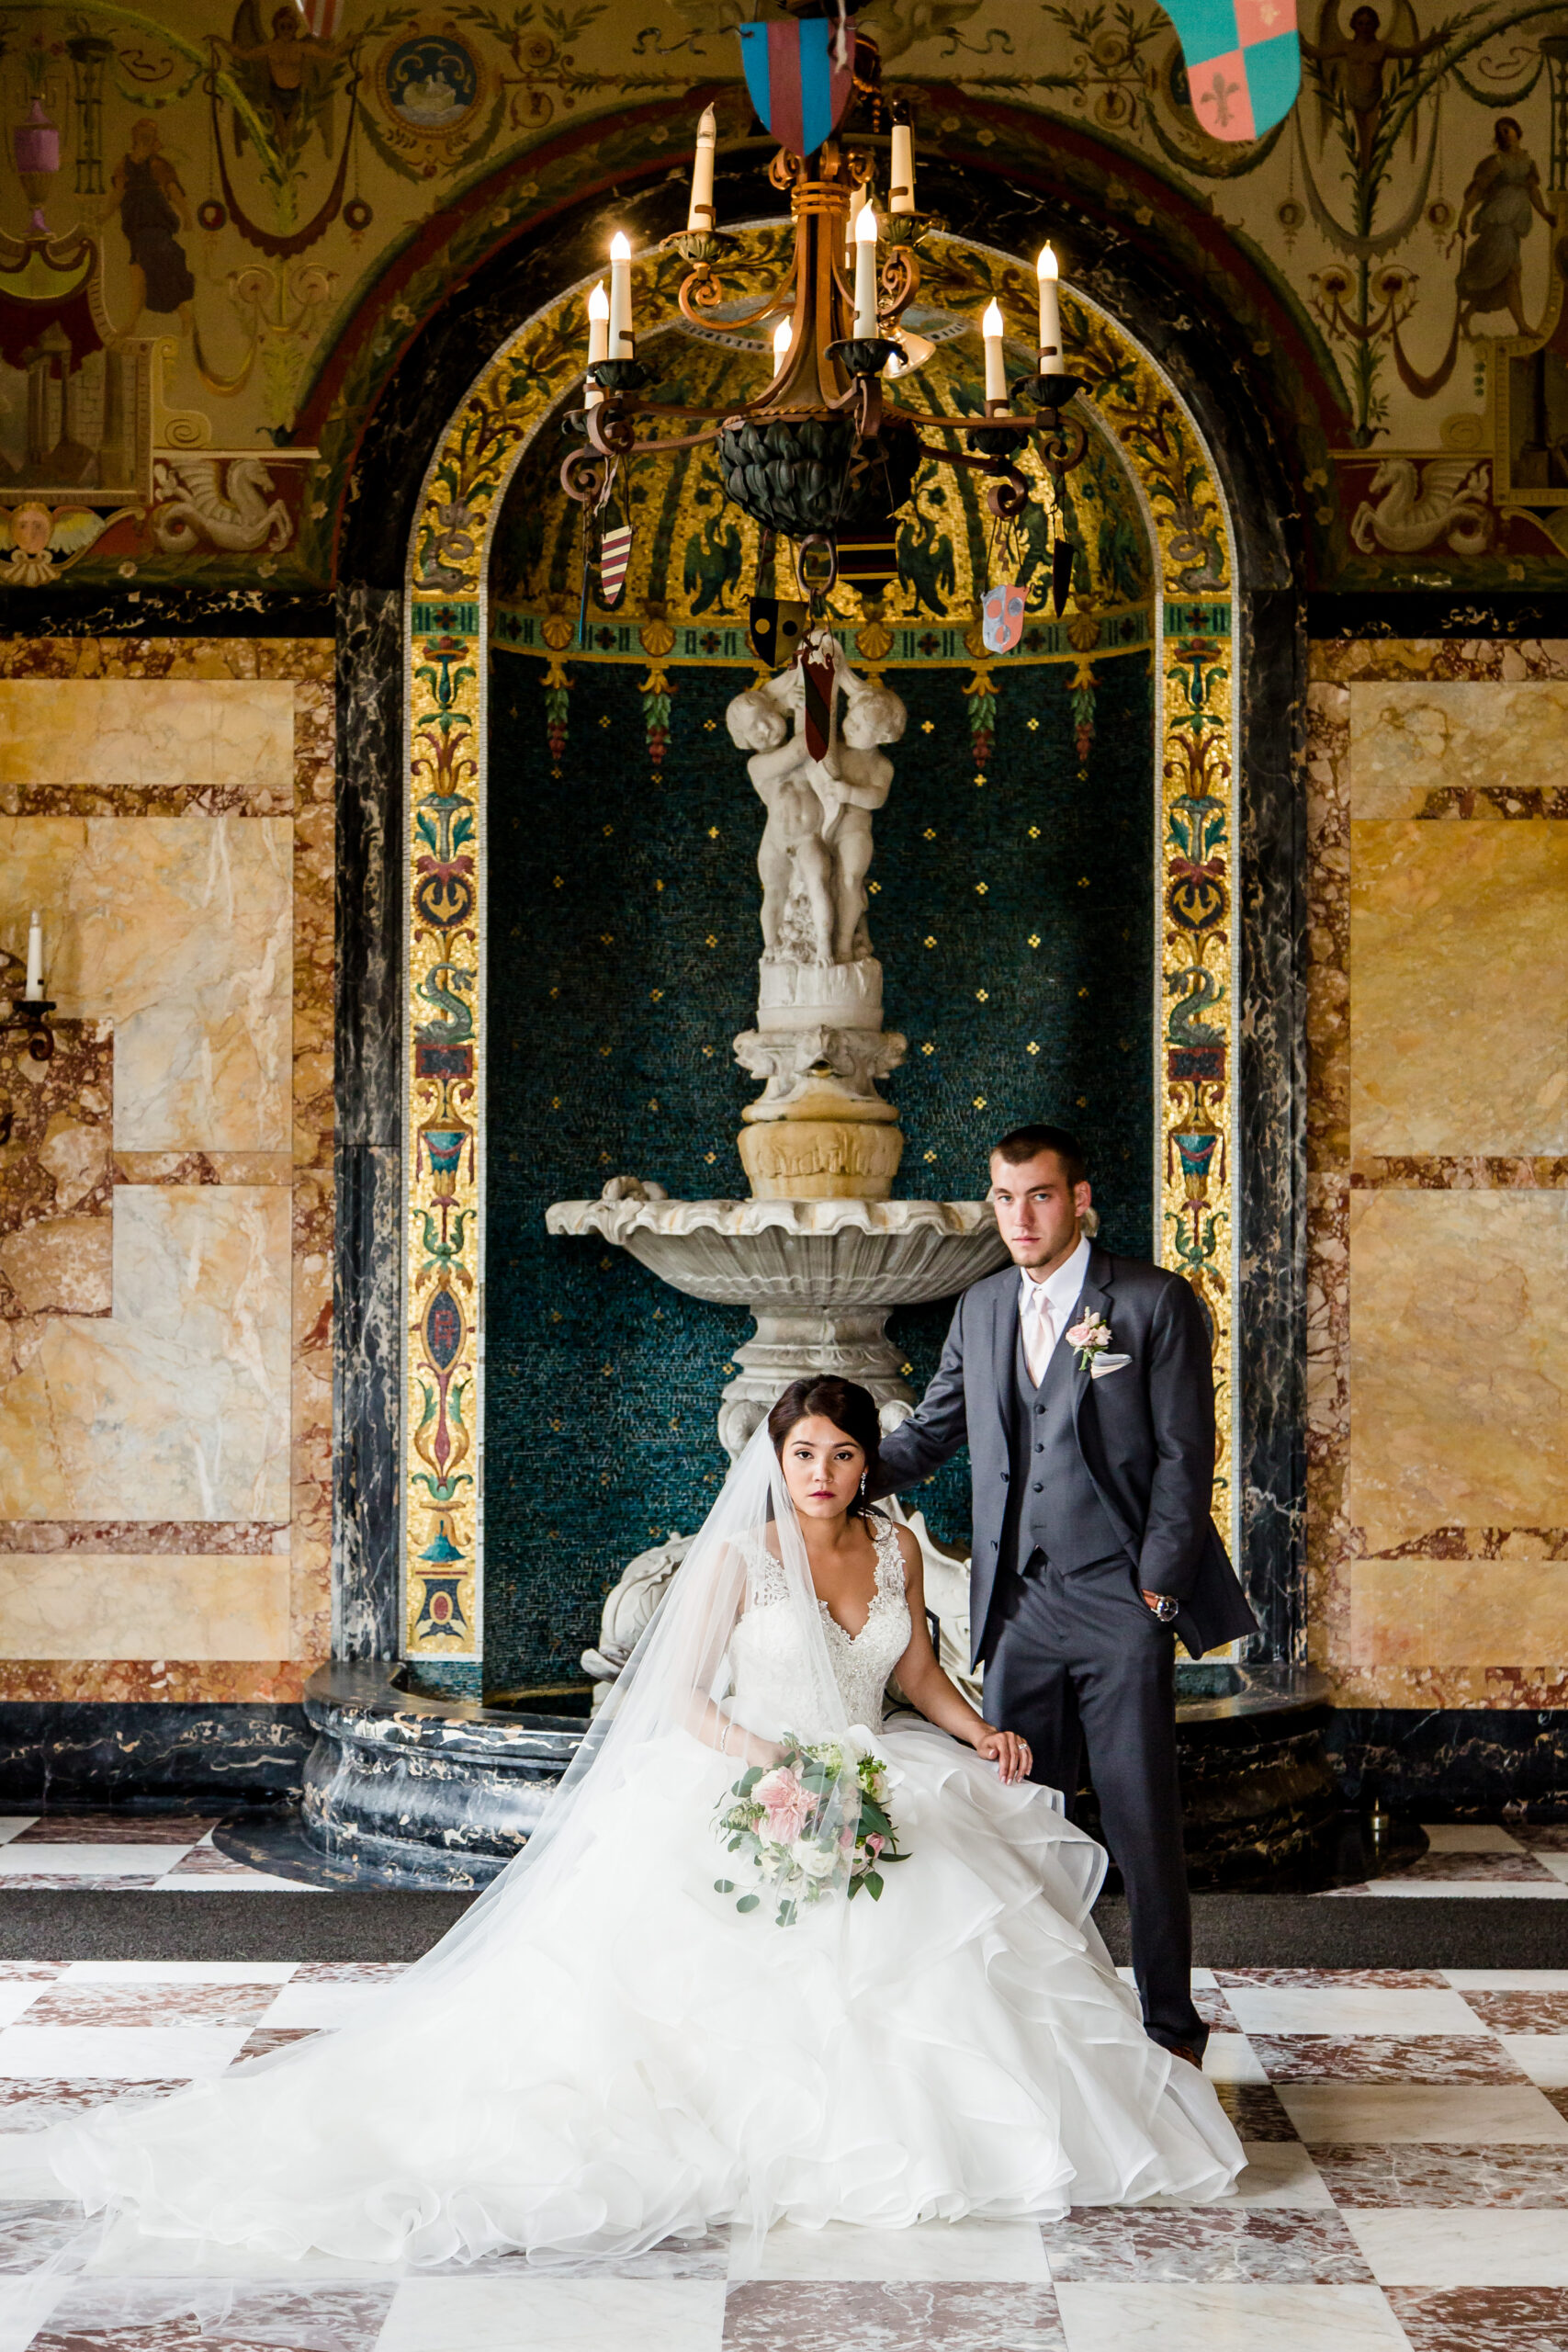 New Jersey Wedding Photographer Jarot Bocanegra captured a bride and groom posing in front of an ornate fountain.